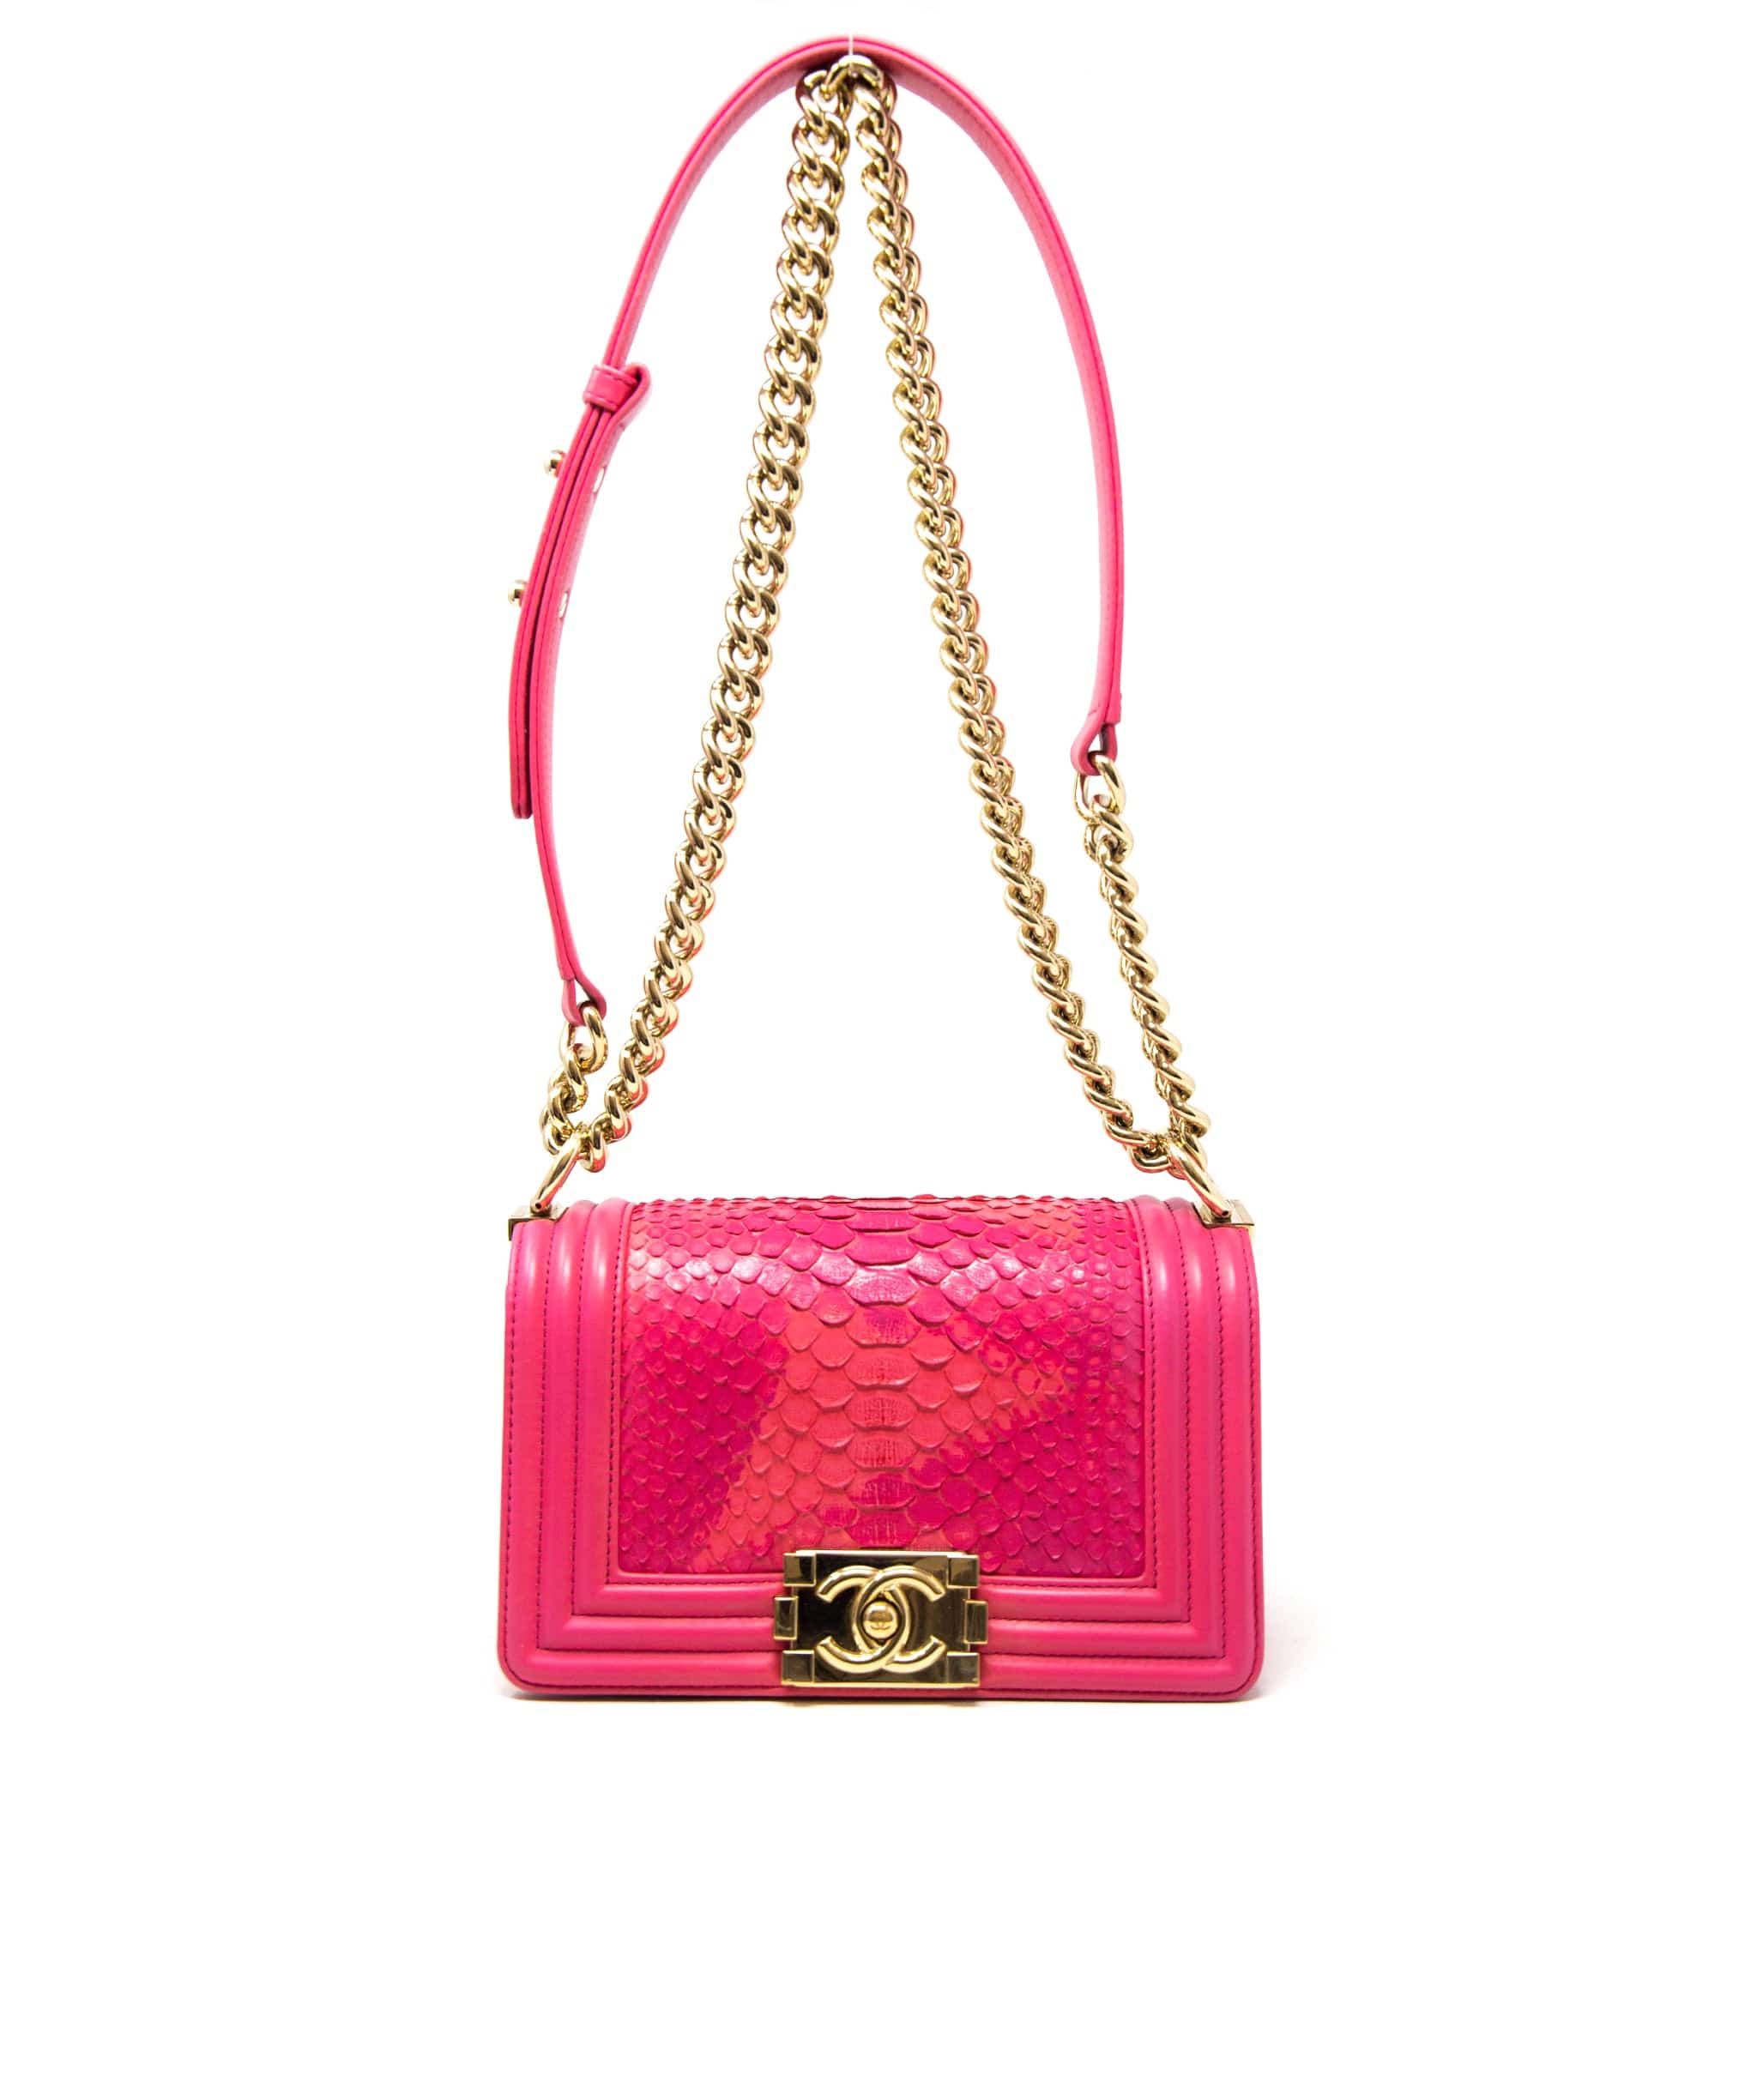 Chanel hot pink python boy bag, with champagne gold hardware - AGC1163